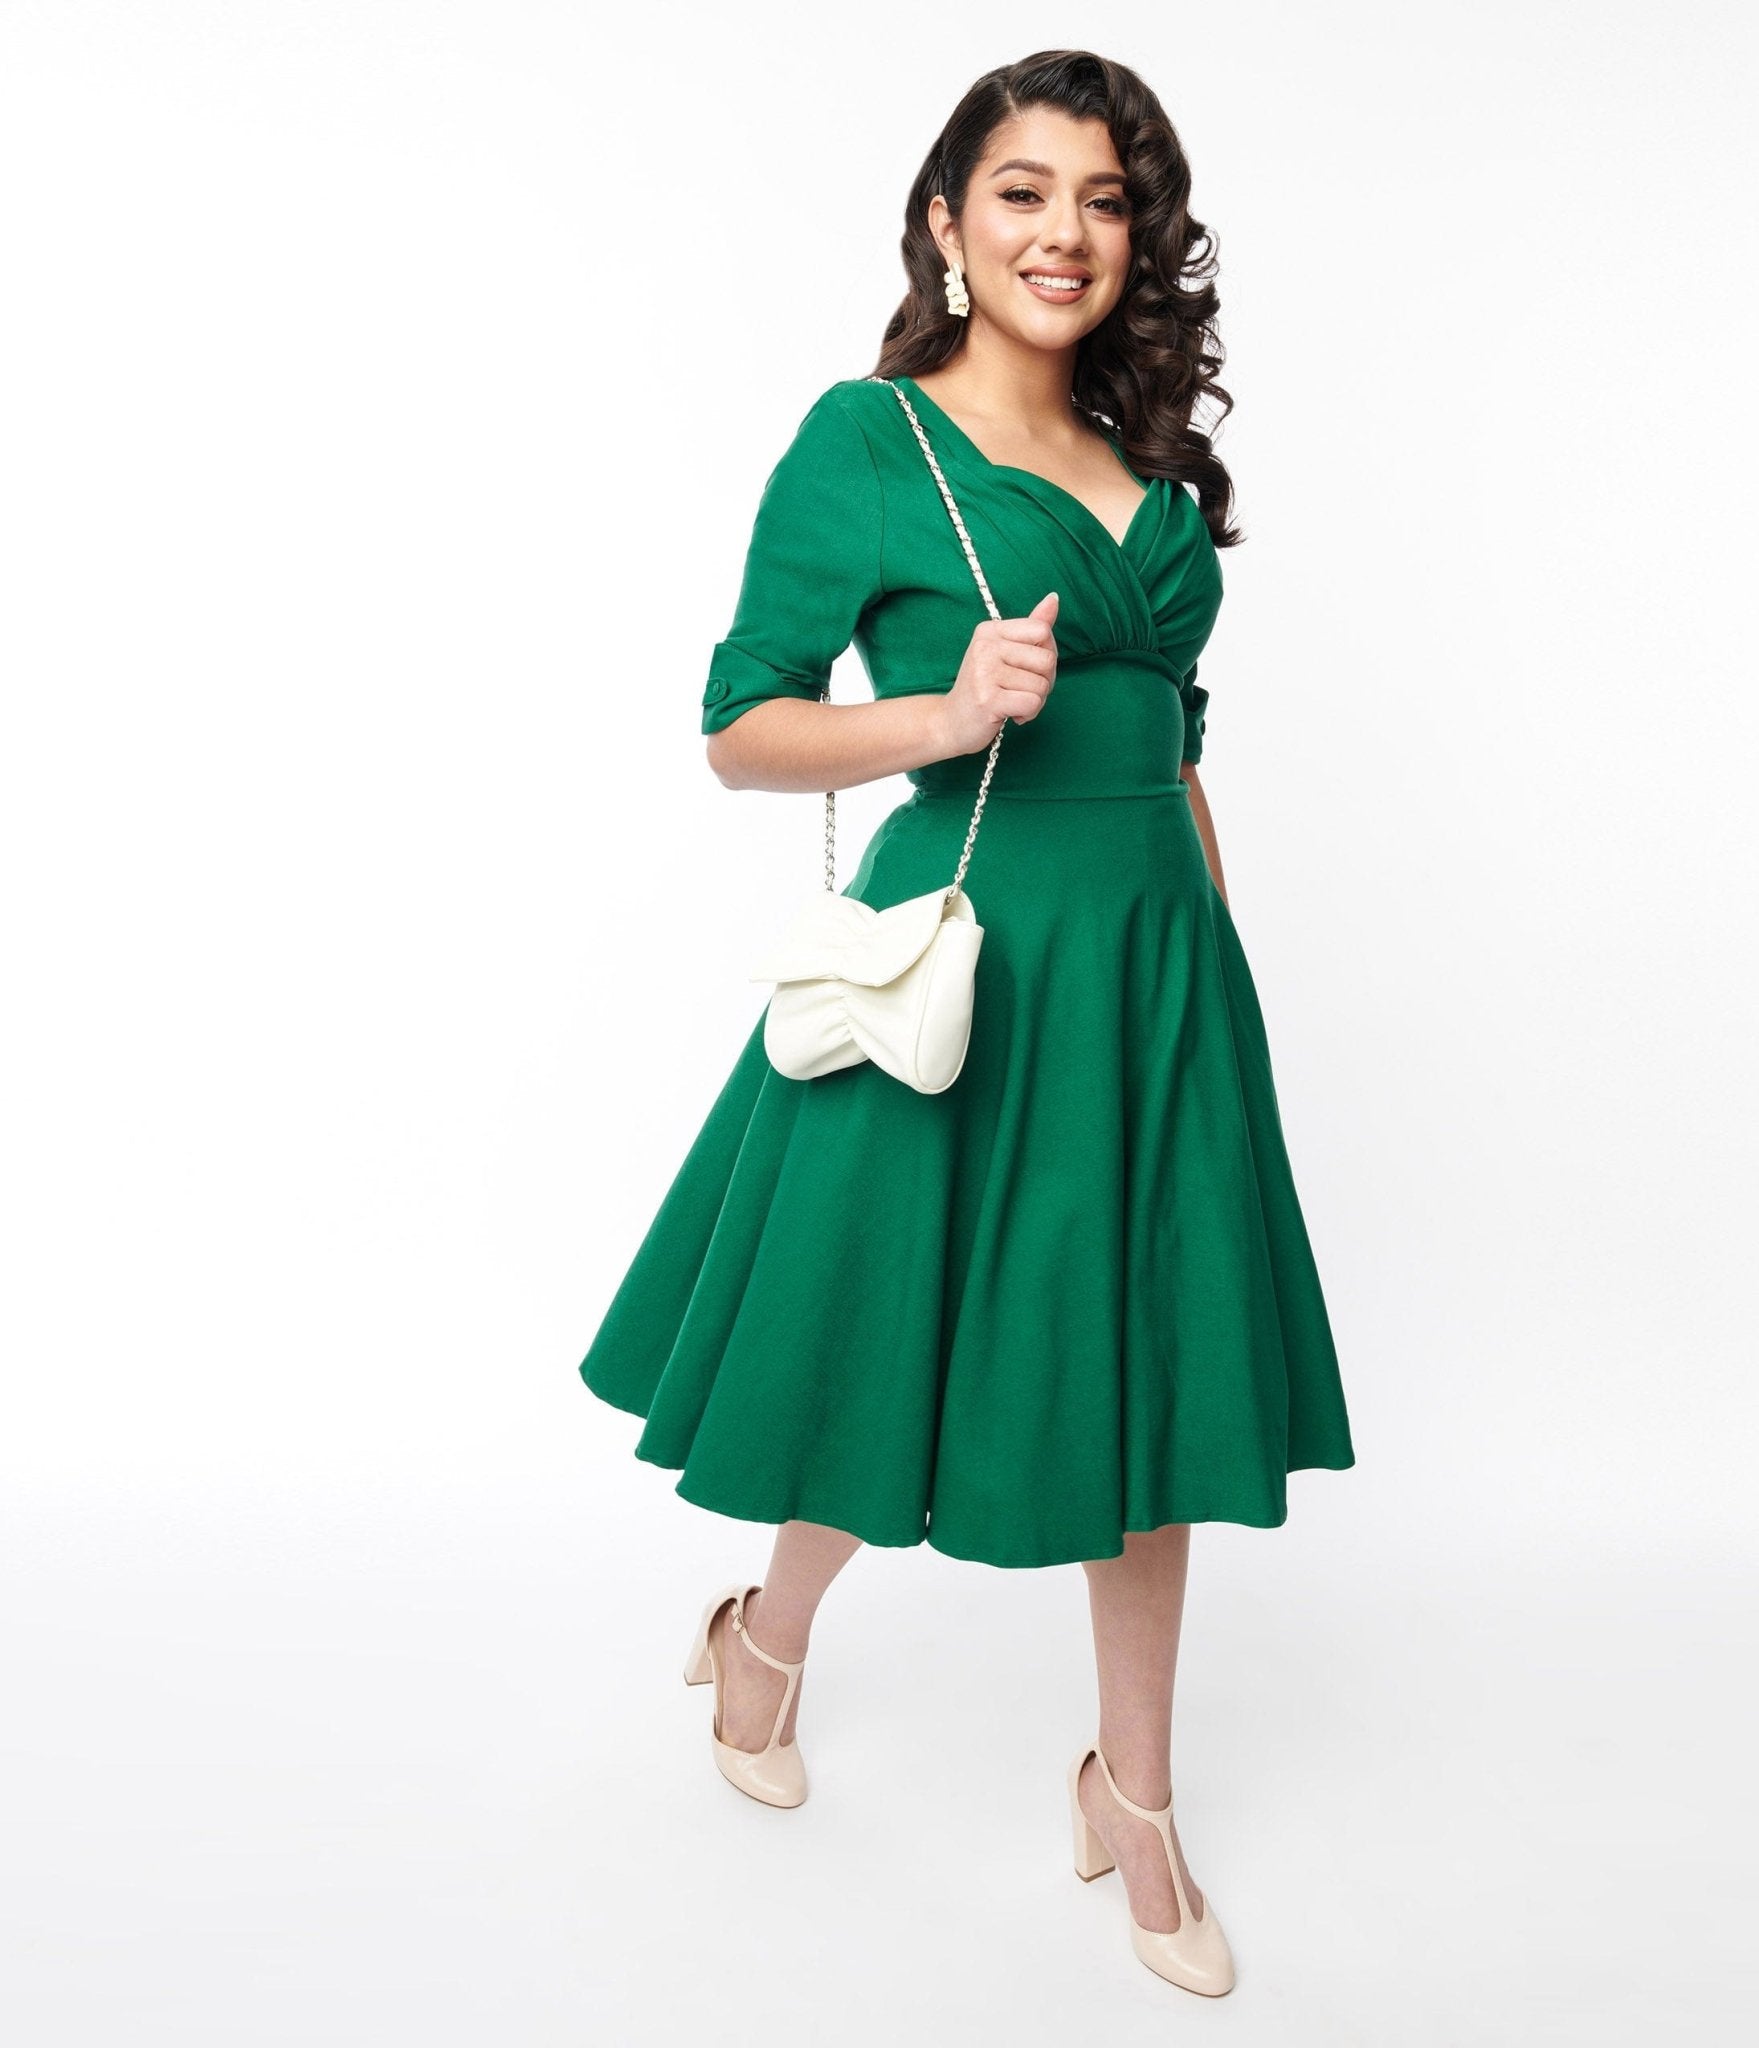 Unique Vintage Emerald Green Delores Swing Dress with Sleeves - Unique Vintage - Womens, DRESSES, SWING